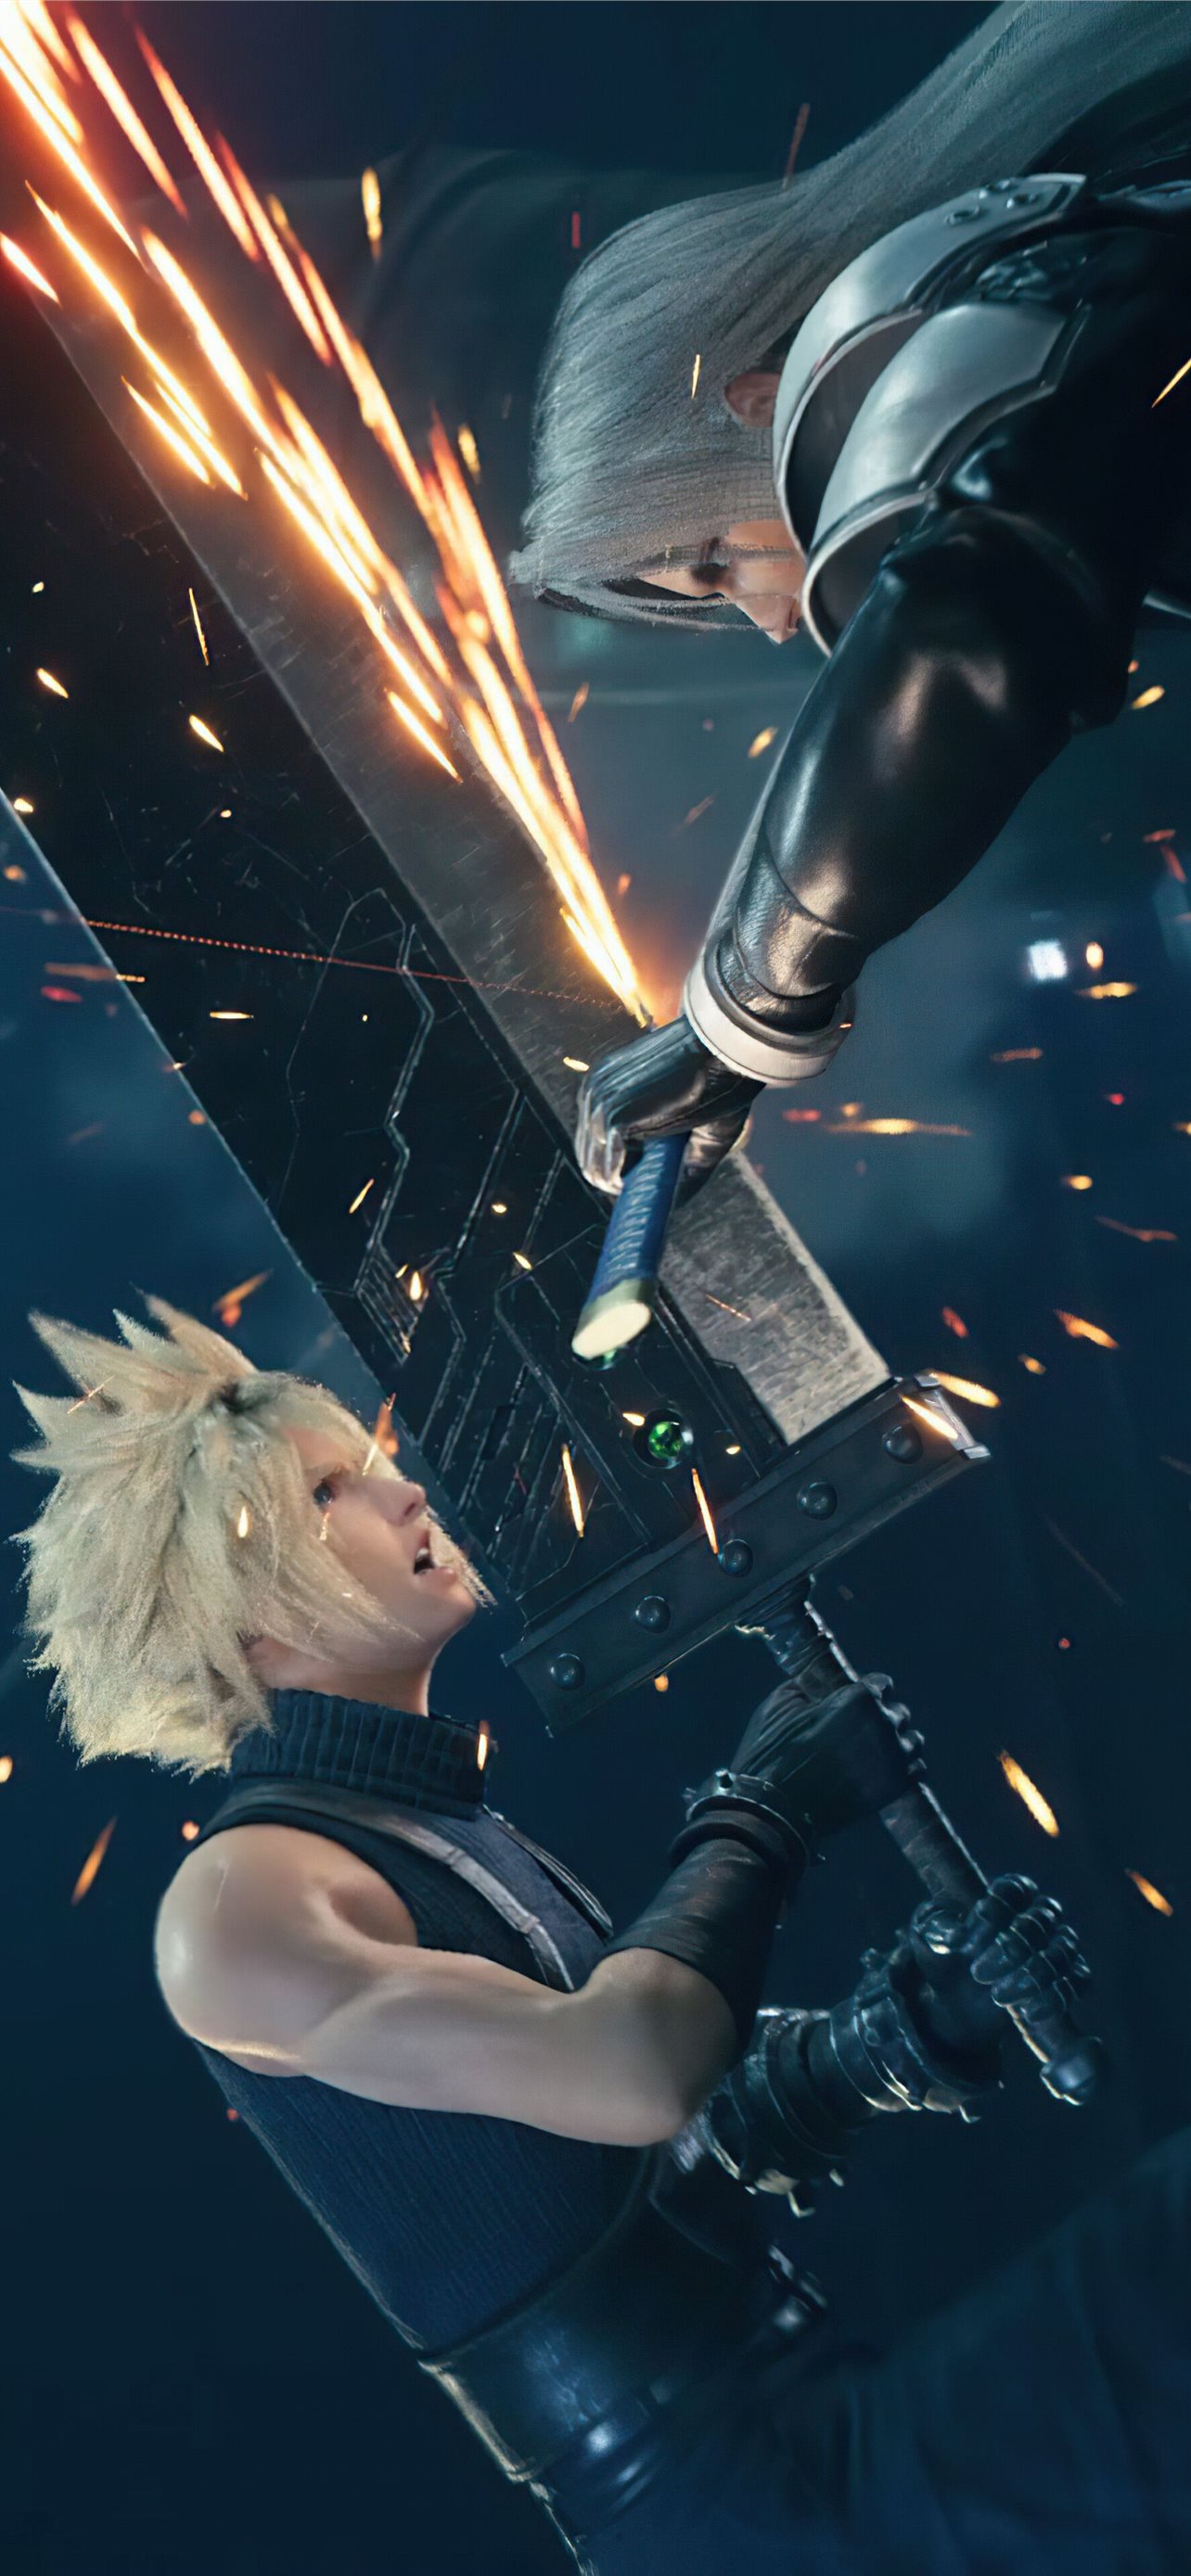 Final Fantasy Vii Iphone Wallpapers Free Download